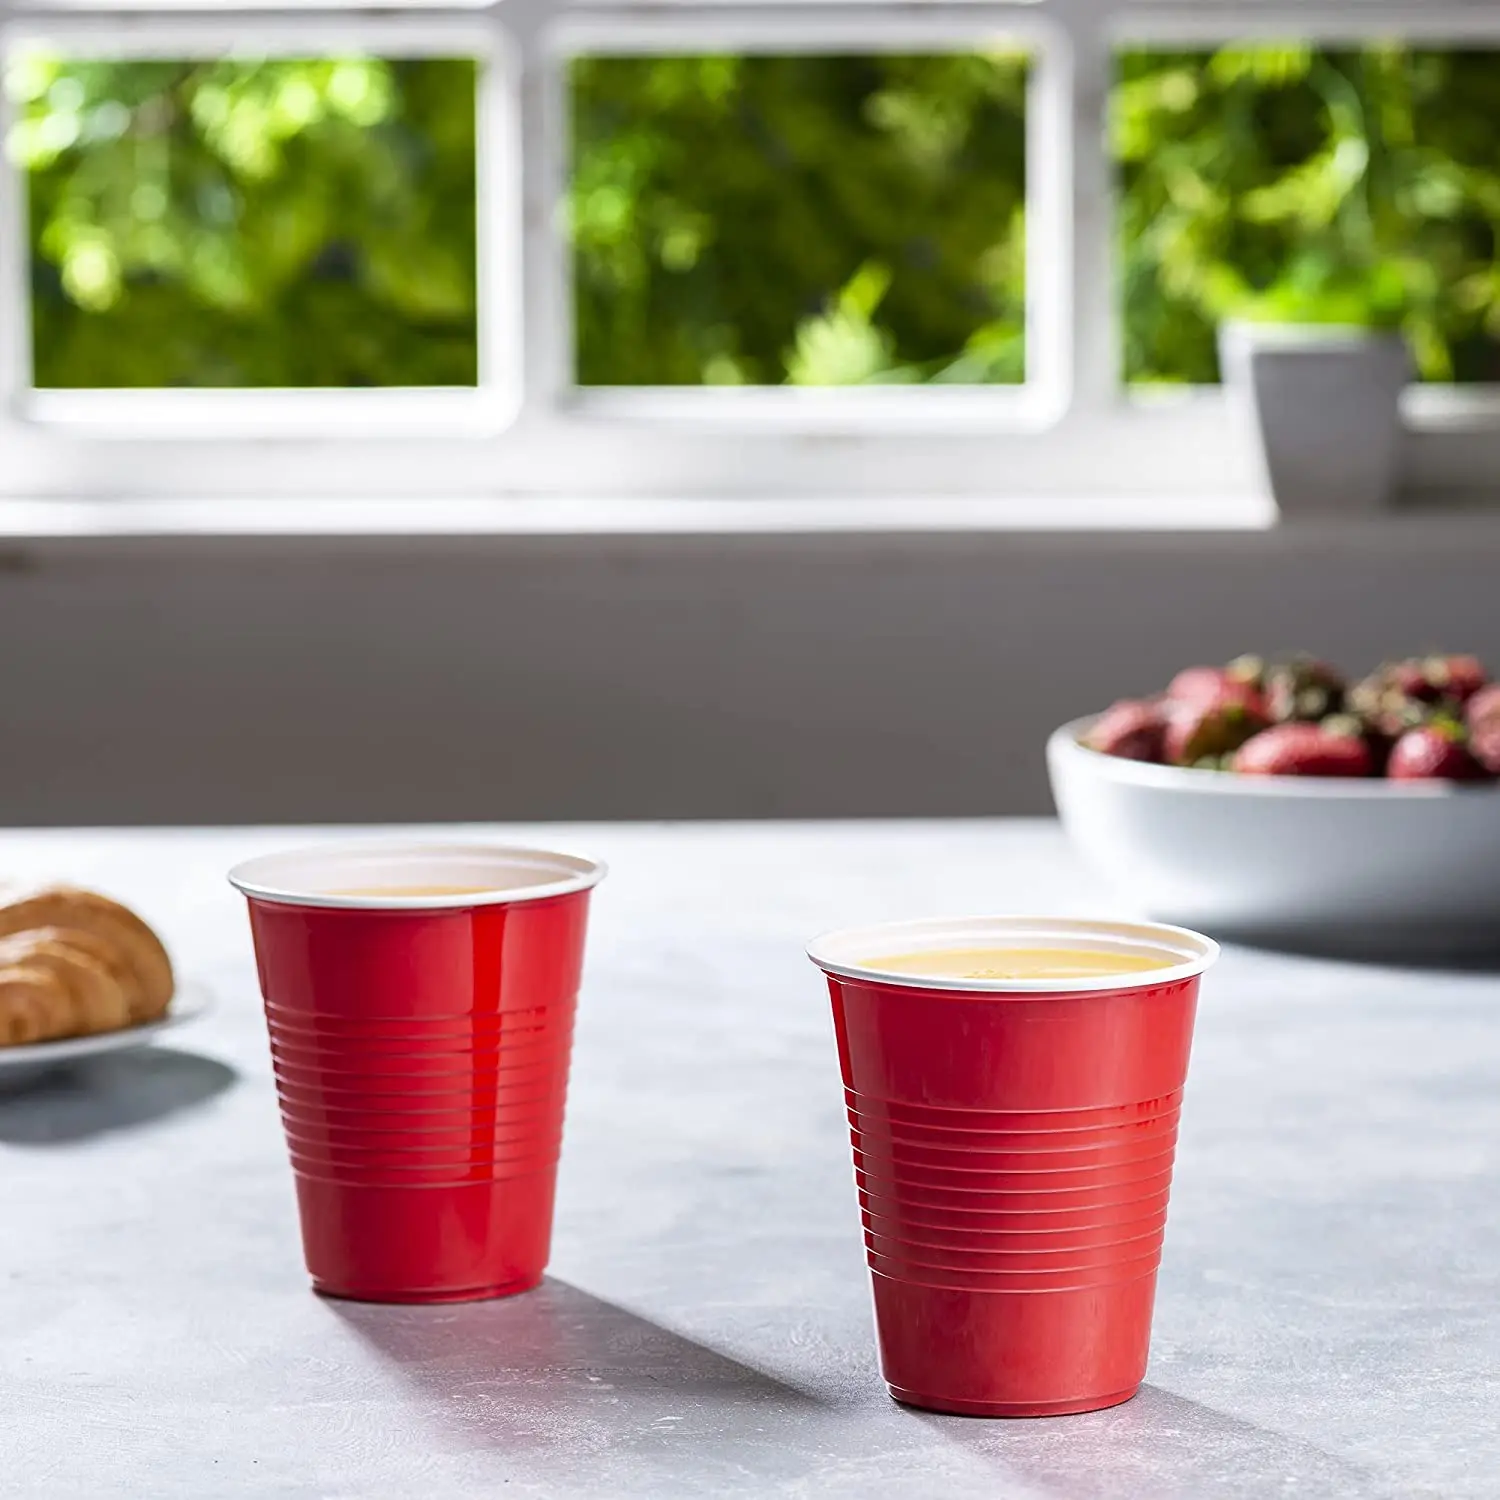 16-Ounce Plastic Party Cups in Red (25 Pack) Disposable Plastic Cups  Recyclable Red Cups with Fill Lines for Drinks,BBQ,Picnics - AliExpress